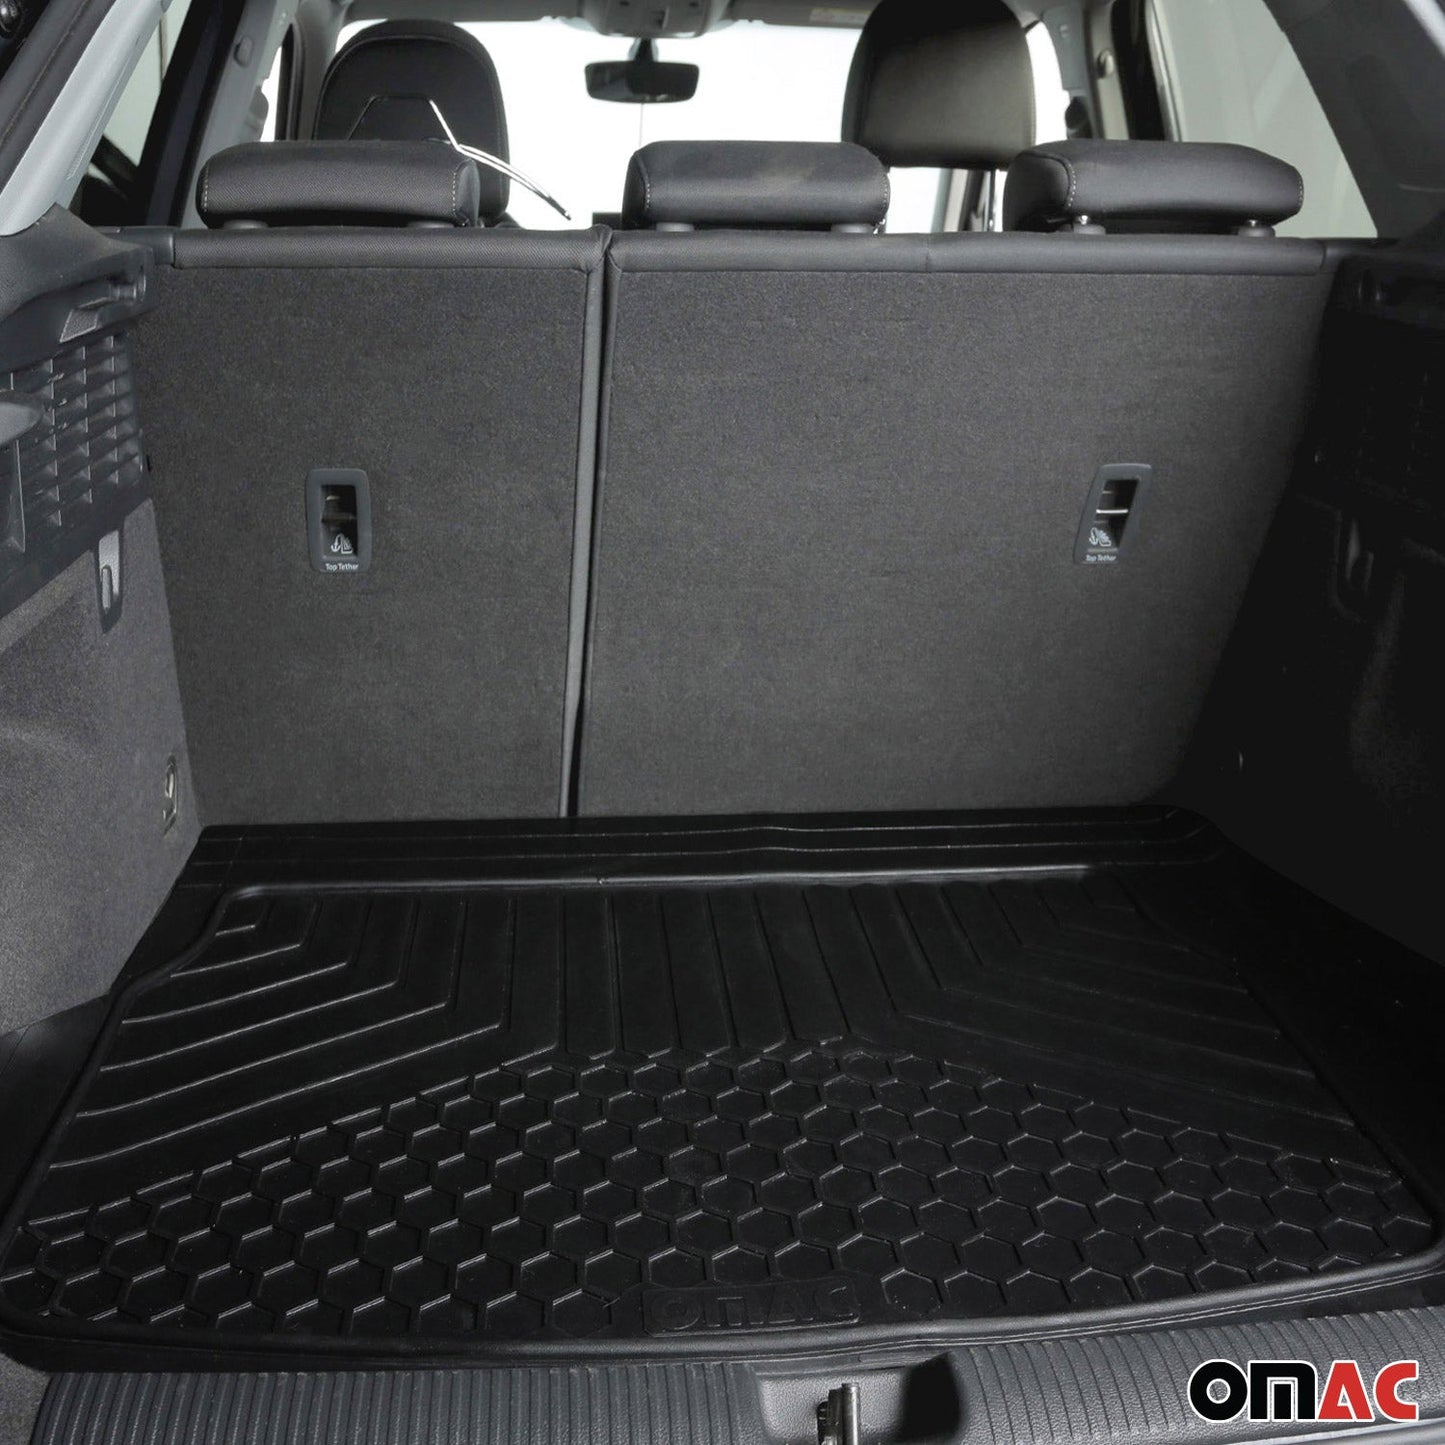 OMAC Rubber All Weather Trunk Cargo Floor Mats for Coupe Convertible Auto Liners 96PF251-7